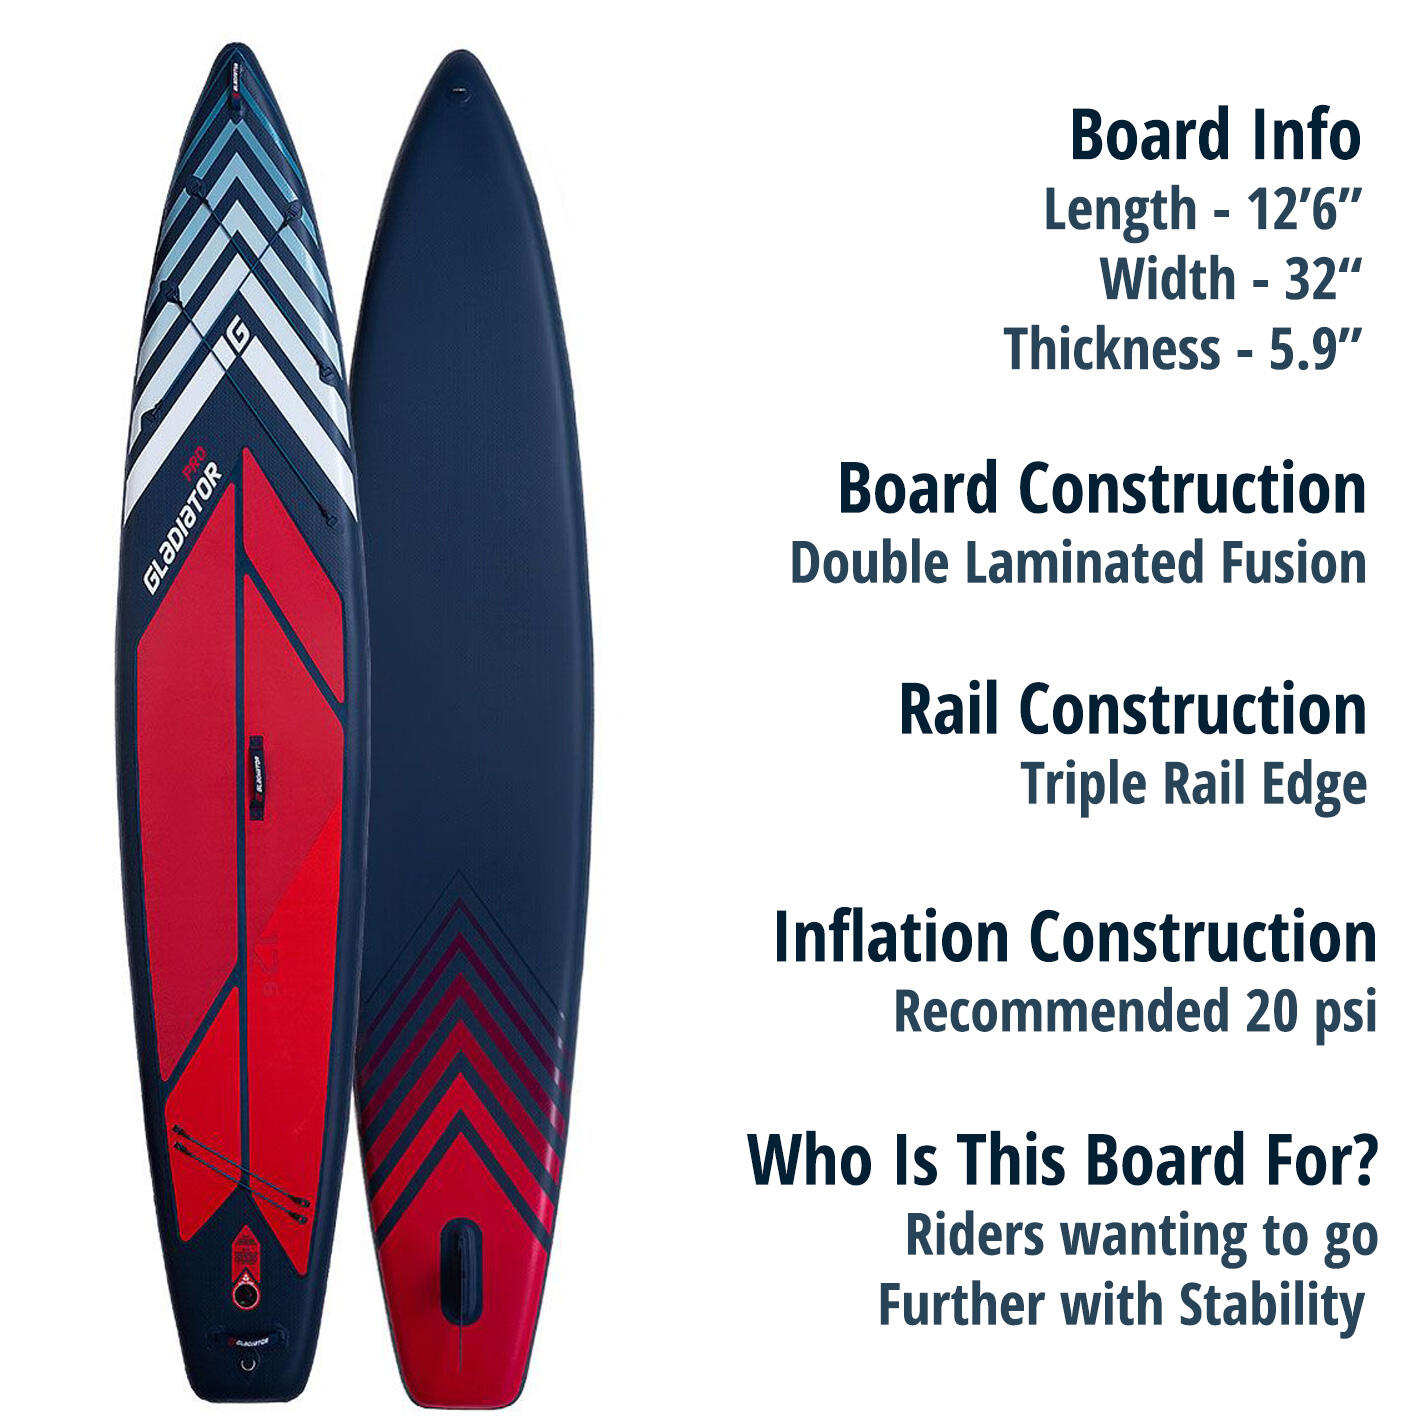 Gladiator PRO Touring 12'6 x 32” x 5.9” Touring Paddle Board For Stability 2/7